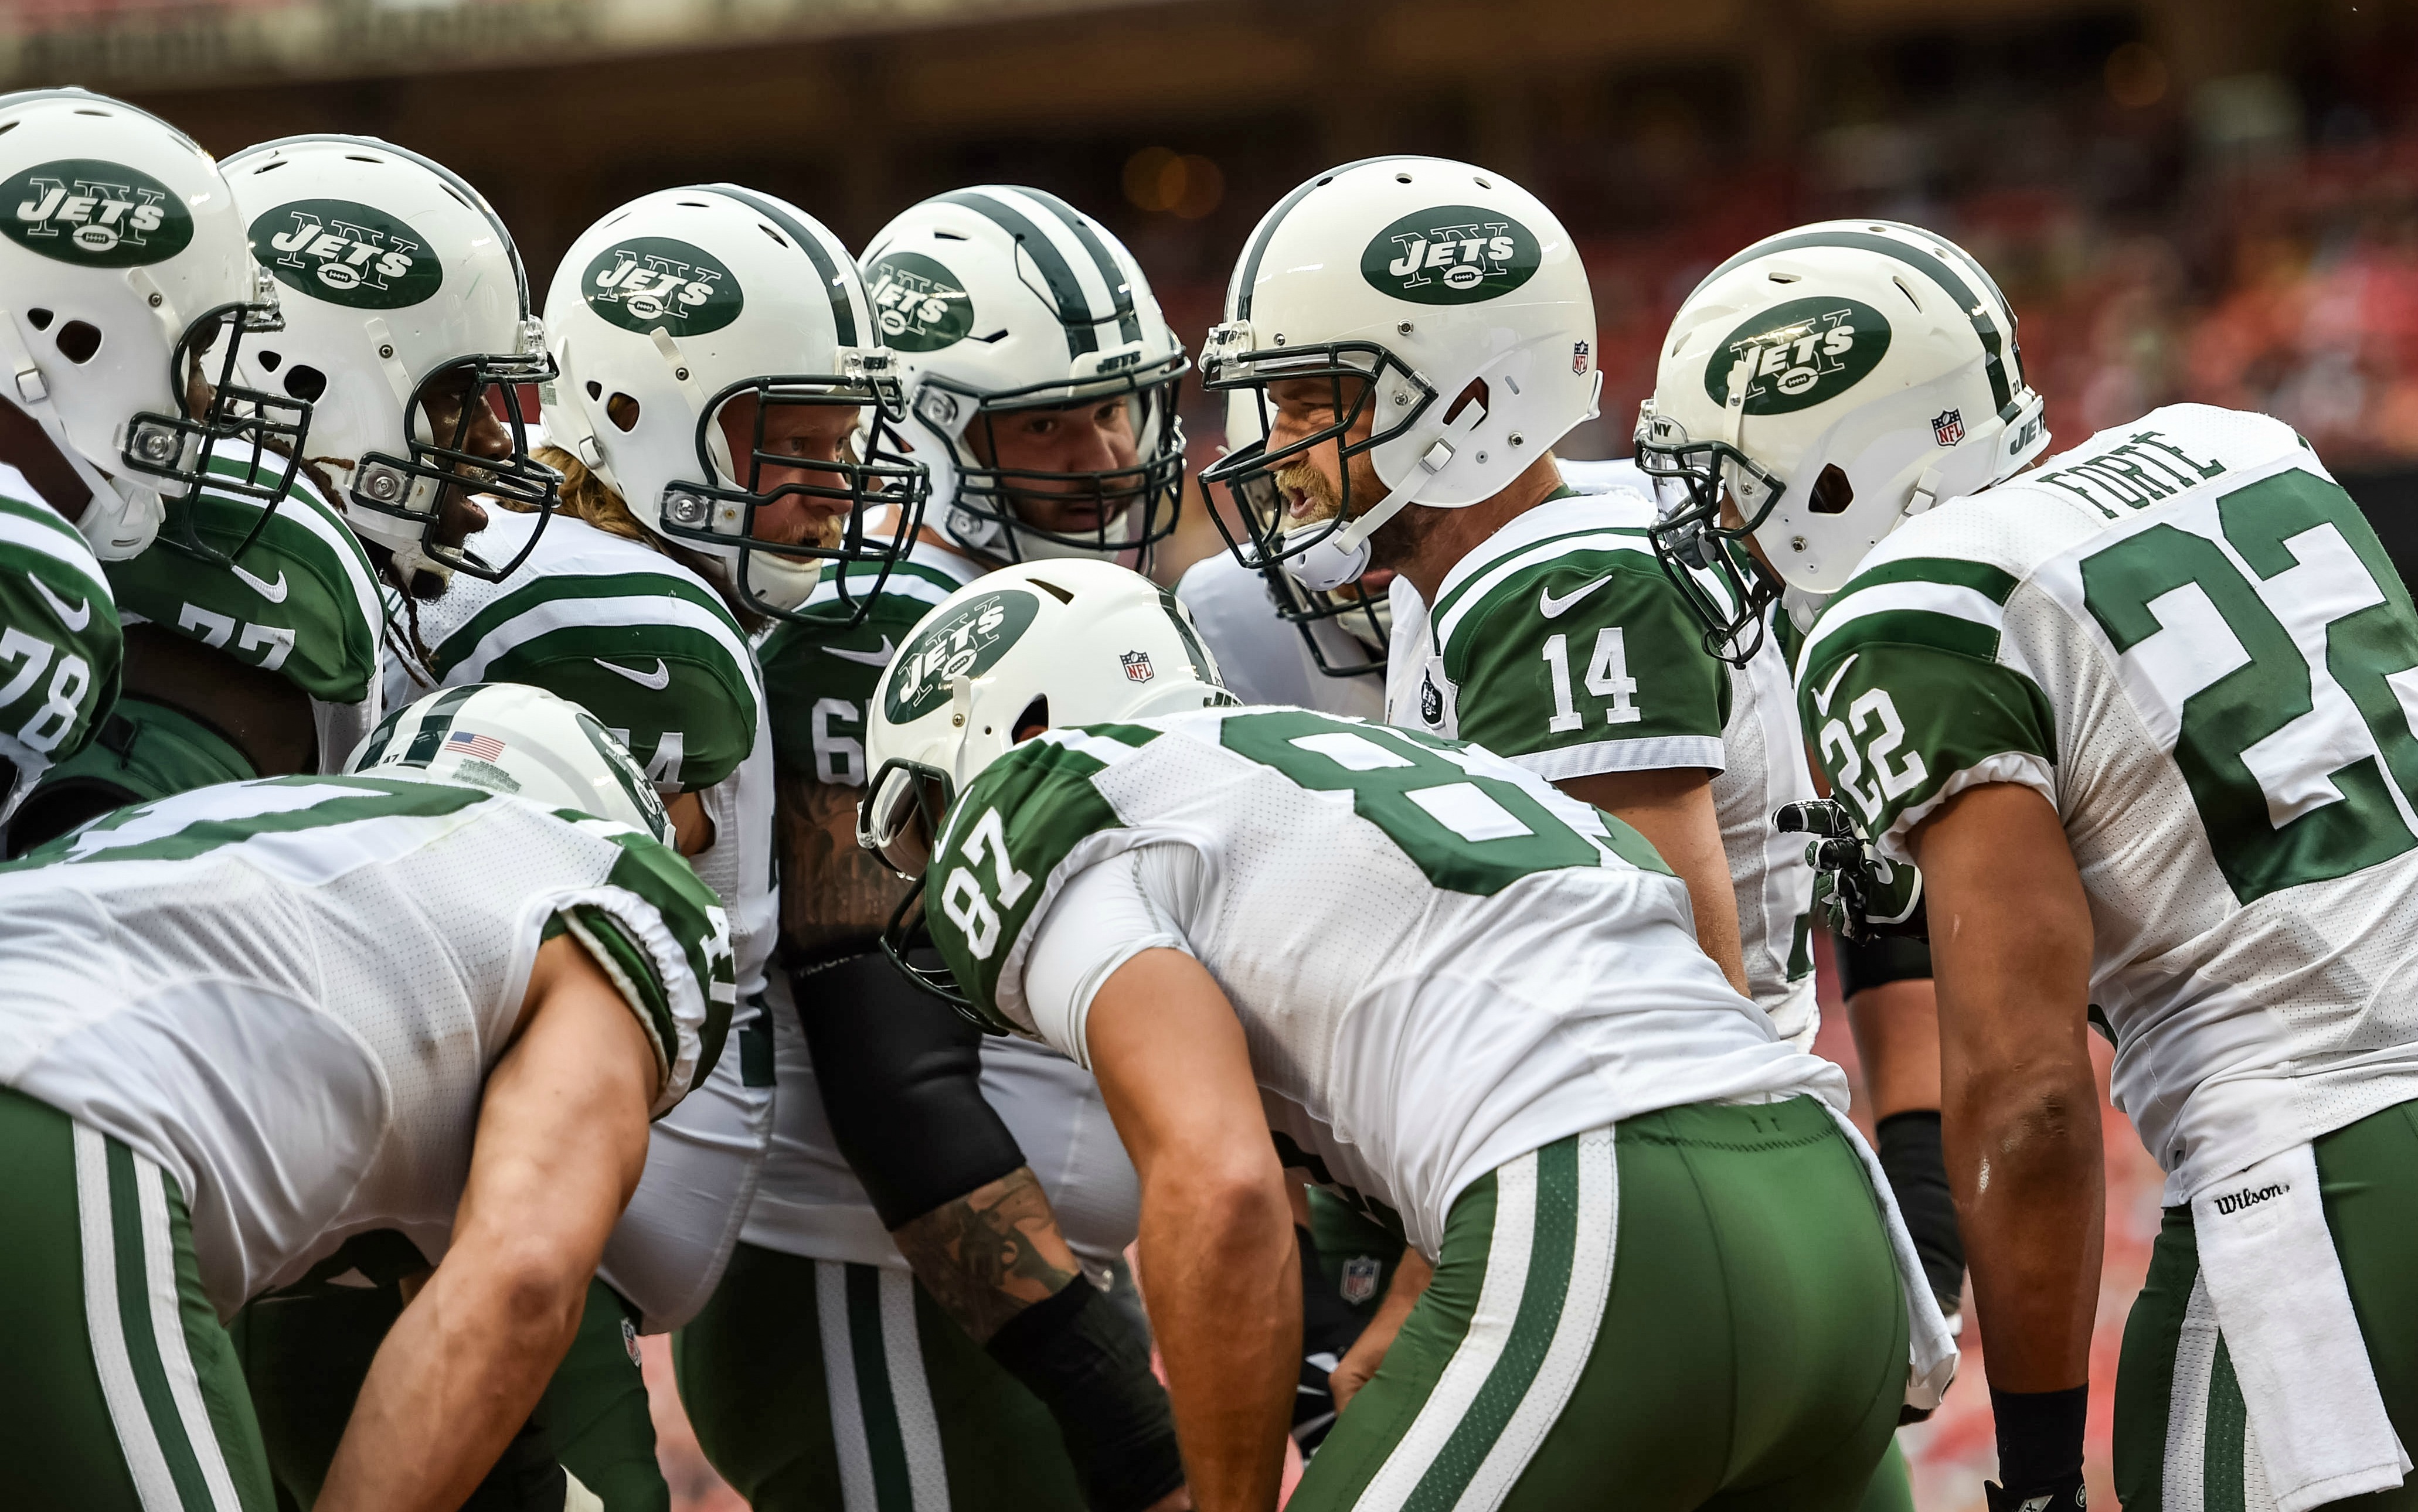 Jets in the huddle